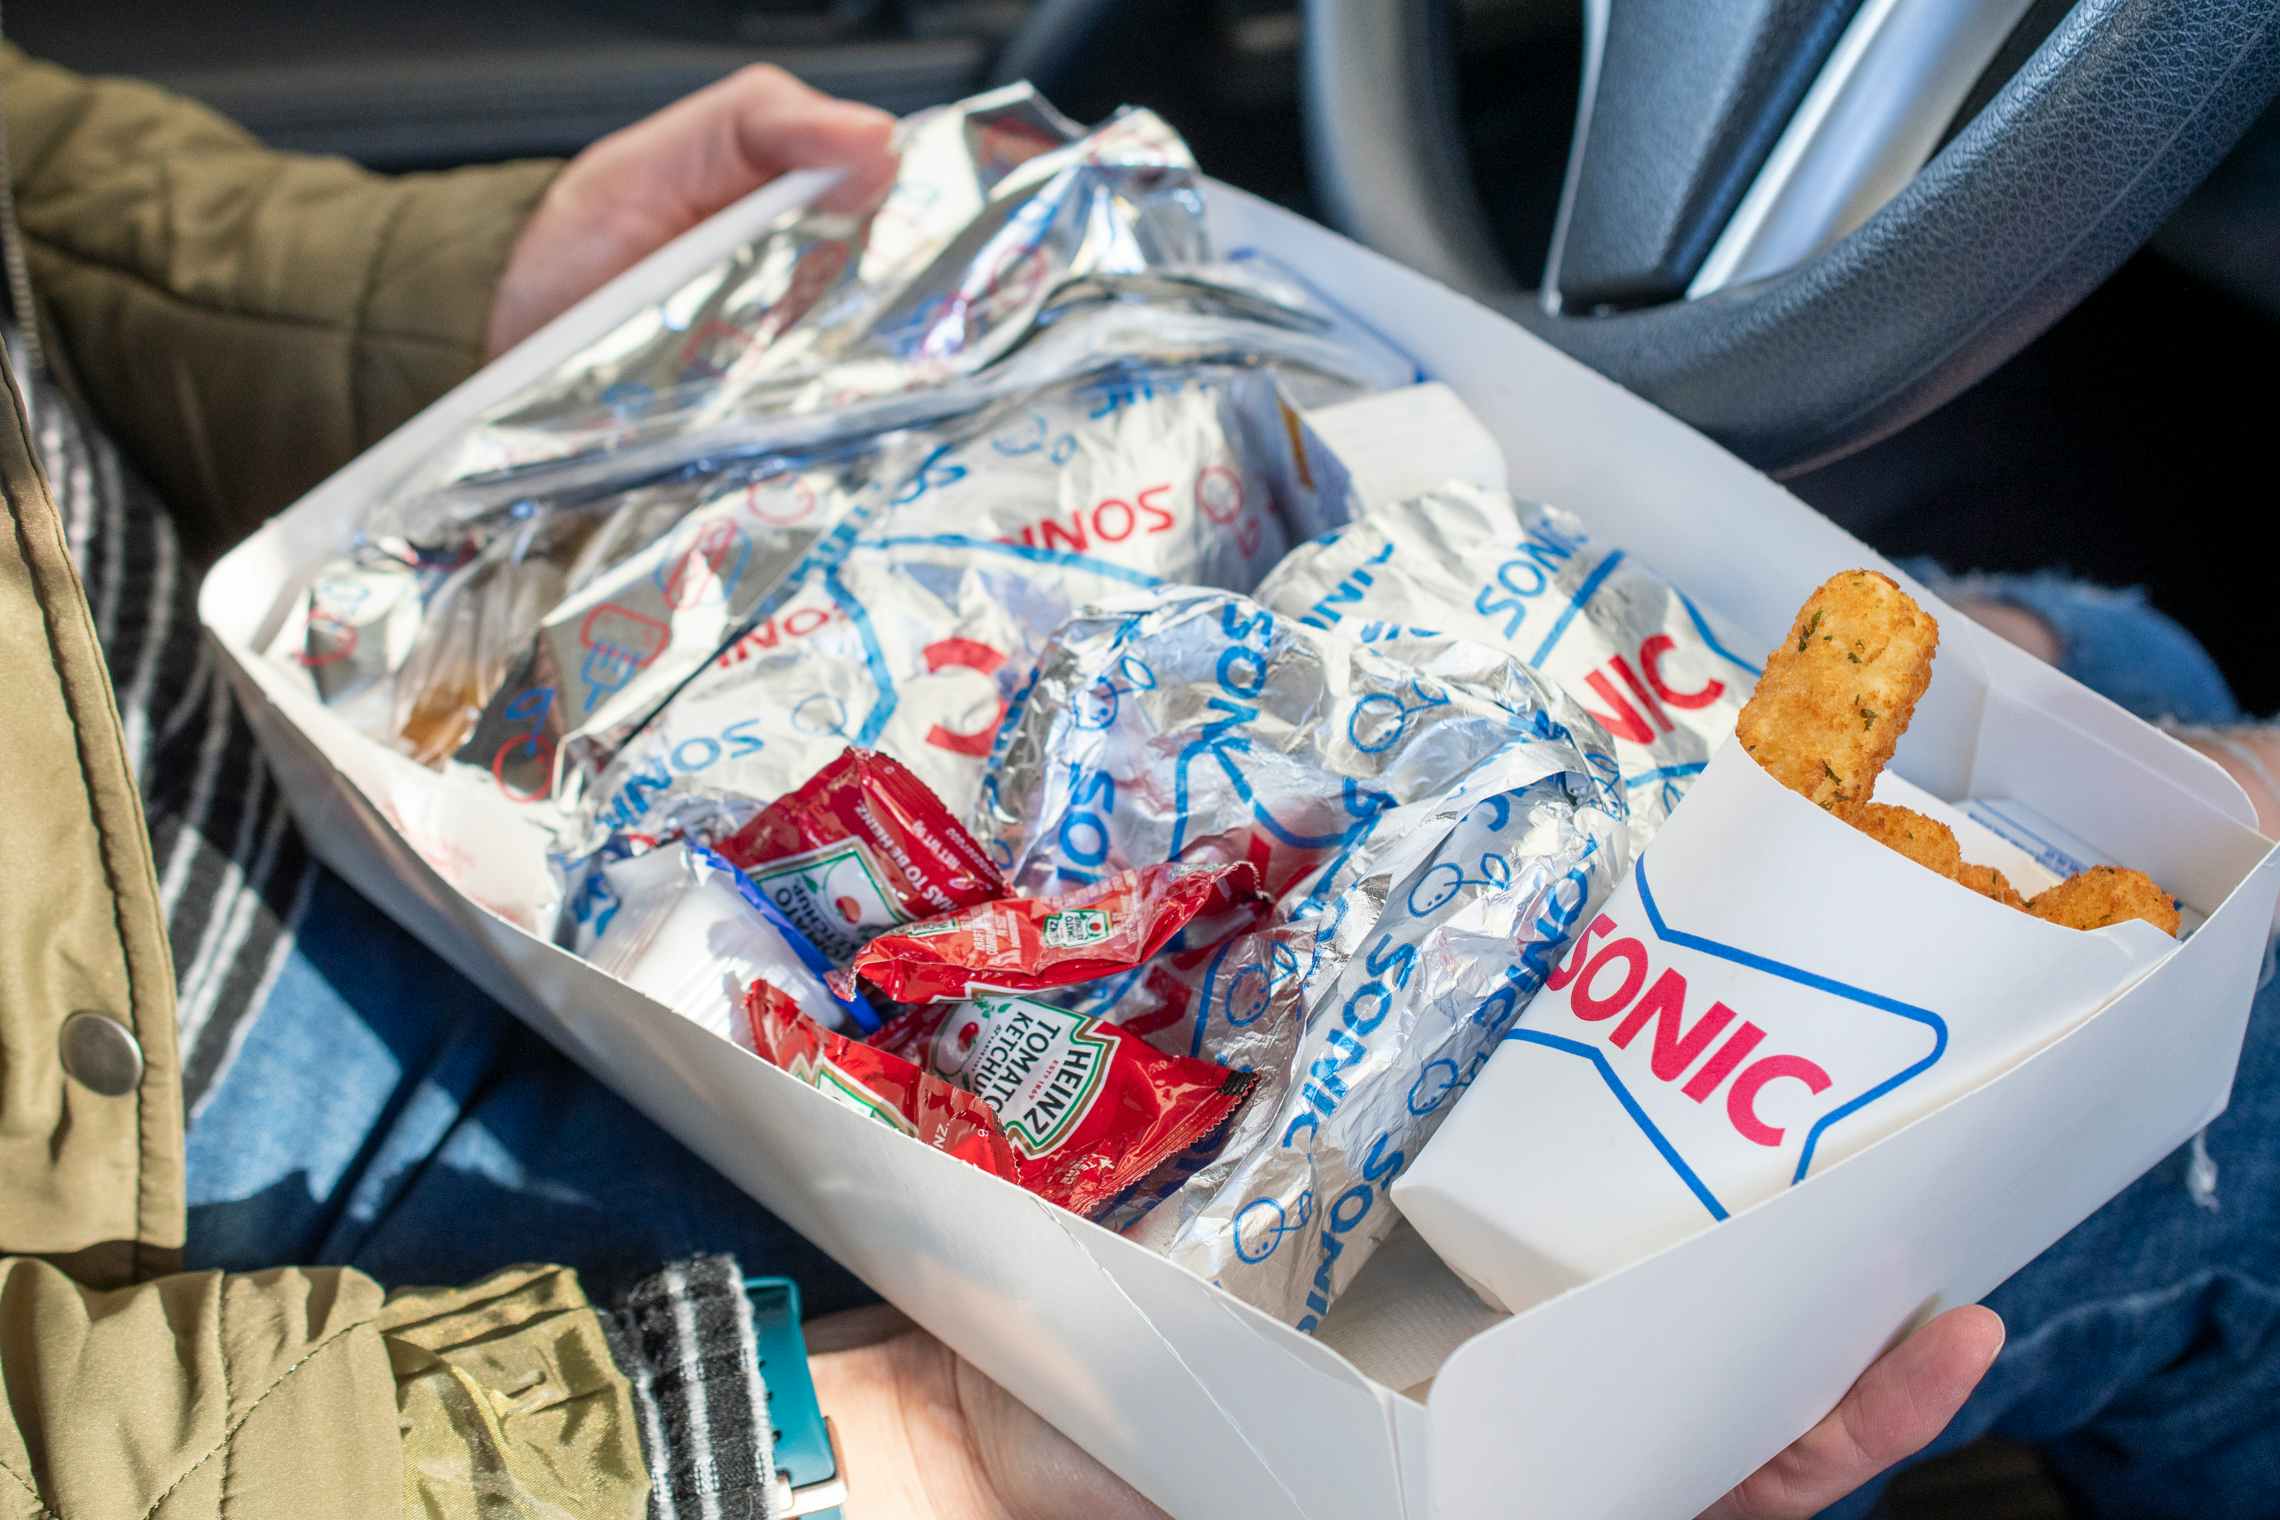 A box full of fast food items, displaying the sonic logo on the packaging.